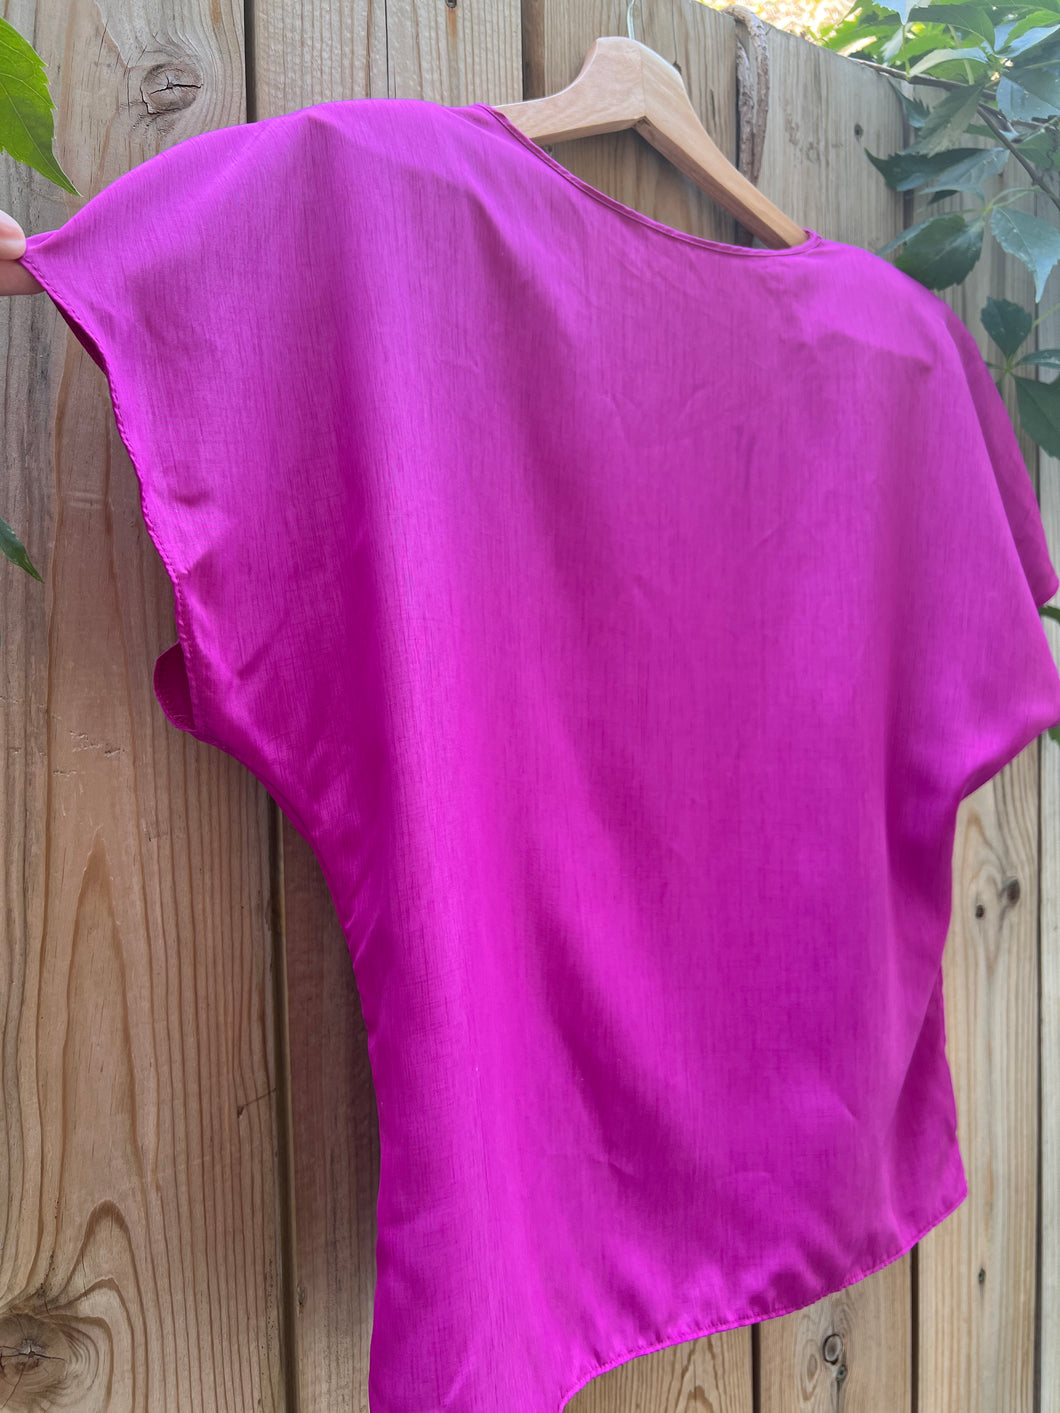 Vintage 80's Hot Pink Silky Cropped Top